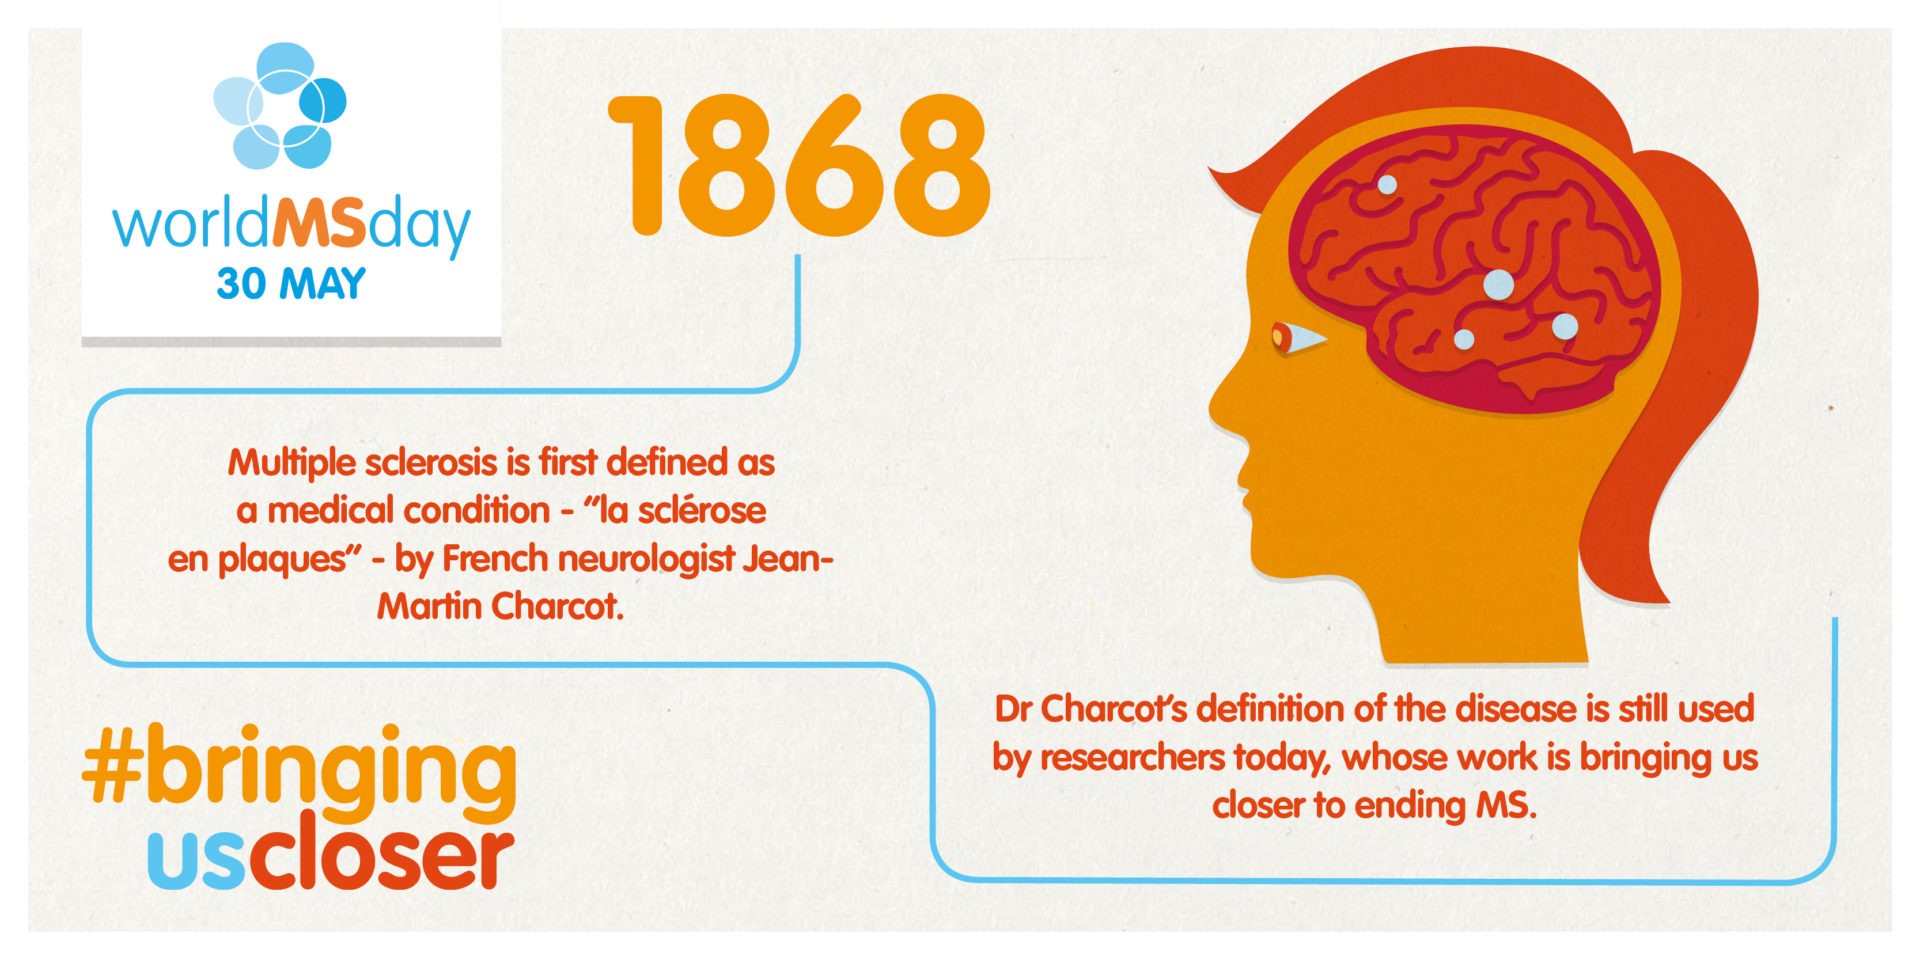 1868 MS is defined as a medical condition